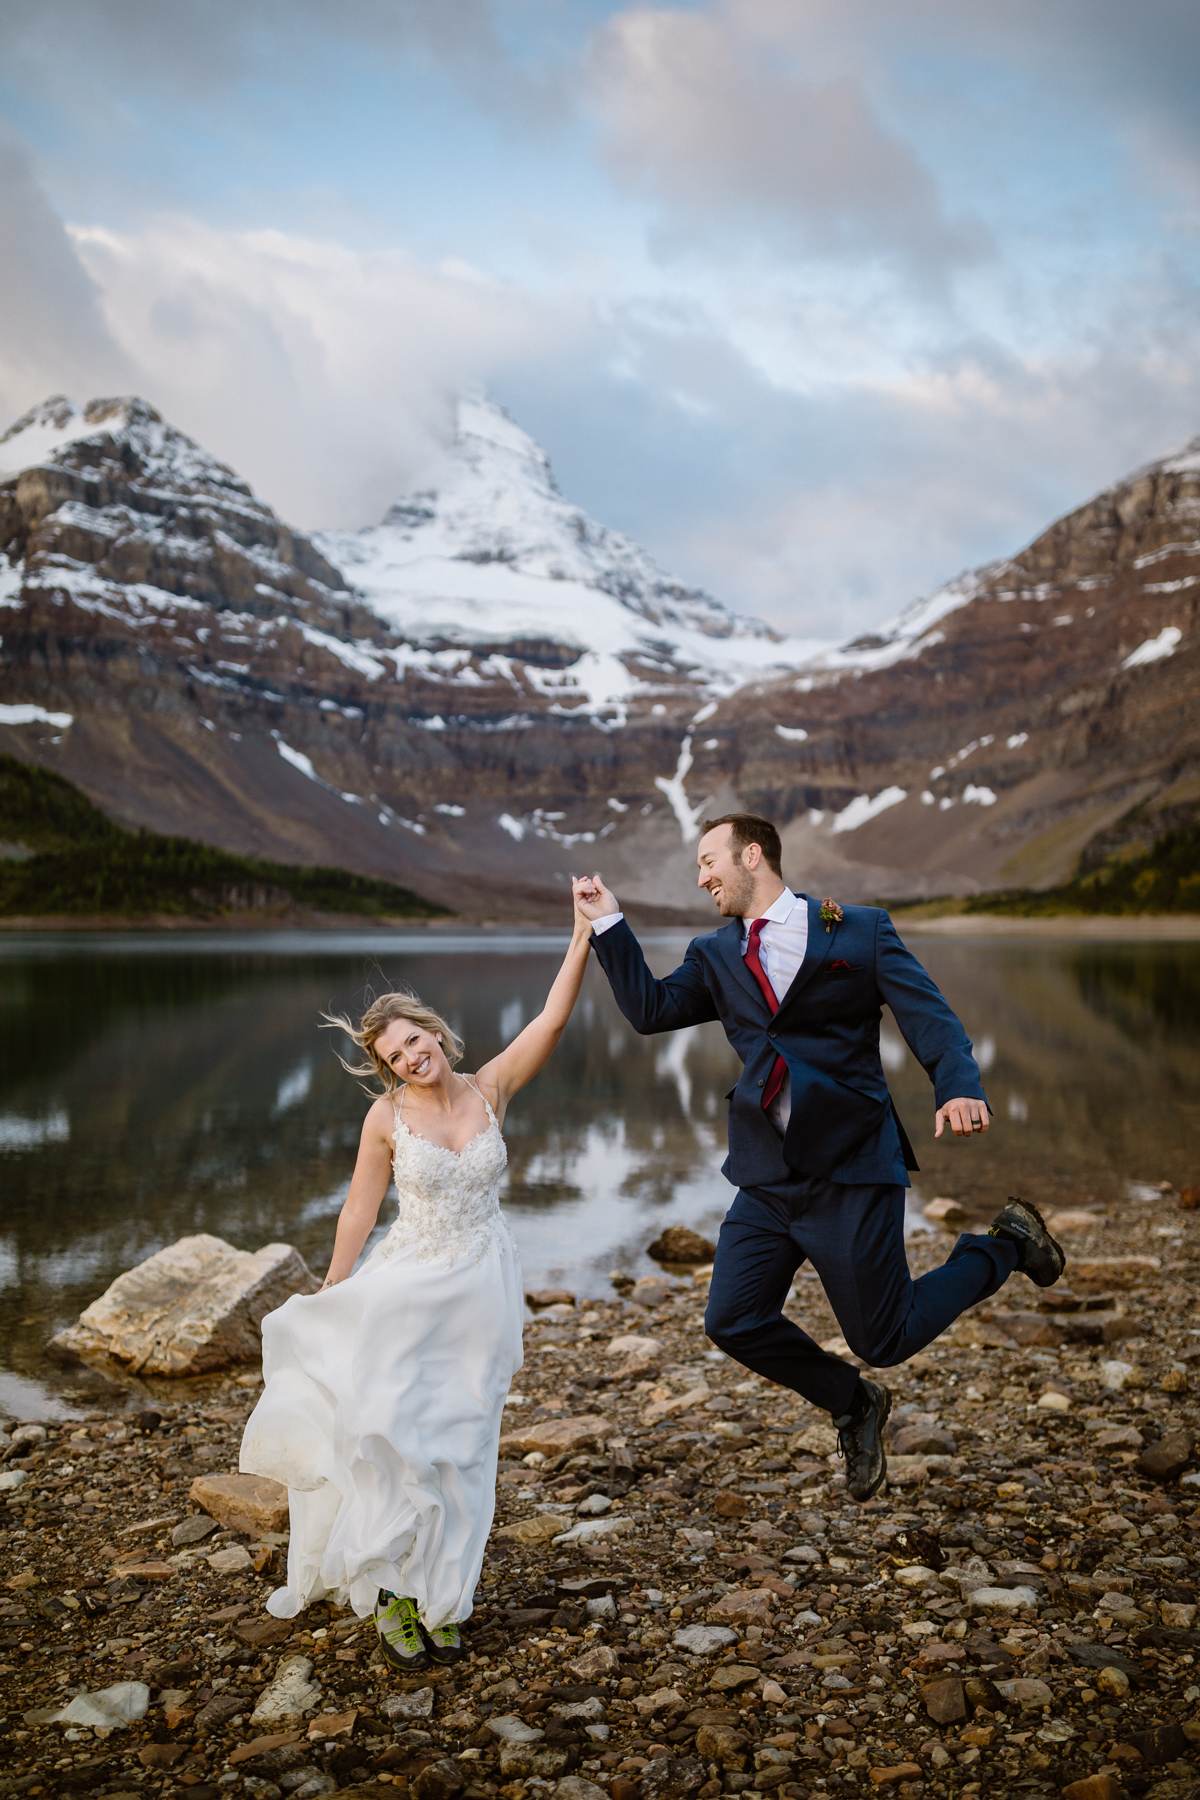 Mount Assiniboine Elopement Photographers at a Backcountry Lodge - Photo 59